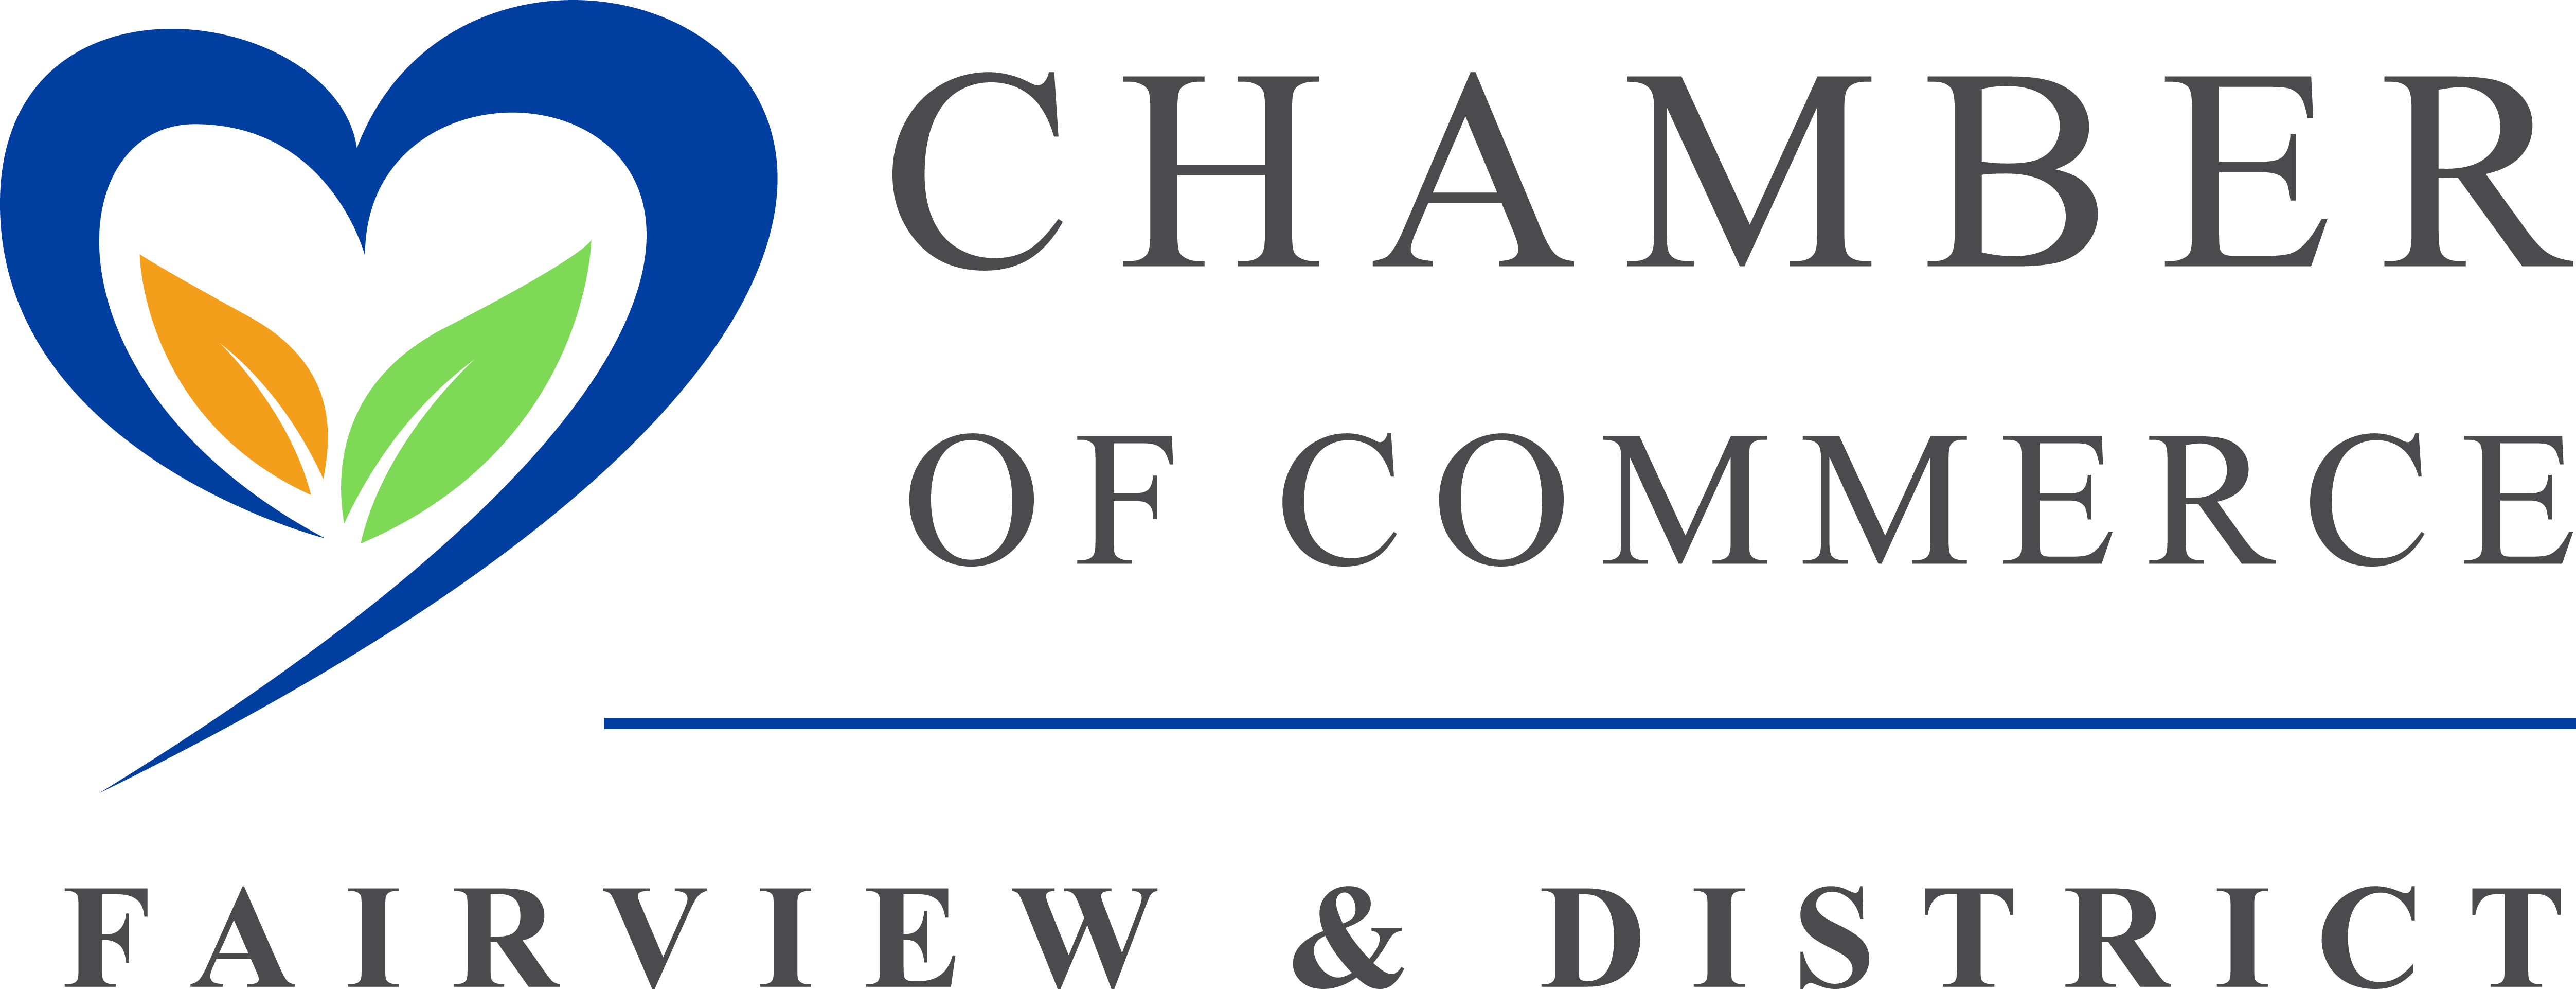 Fairview & District Chamber of Commerce